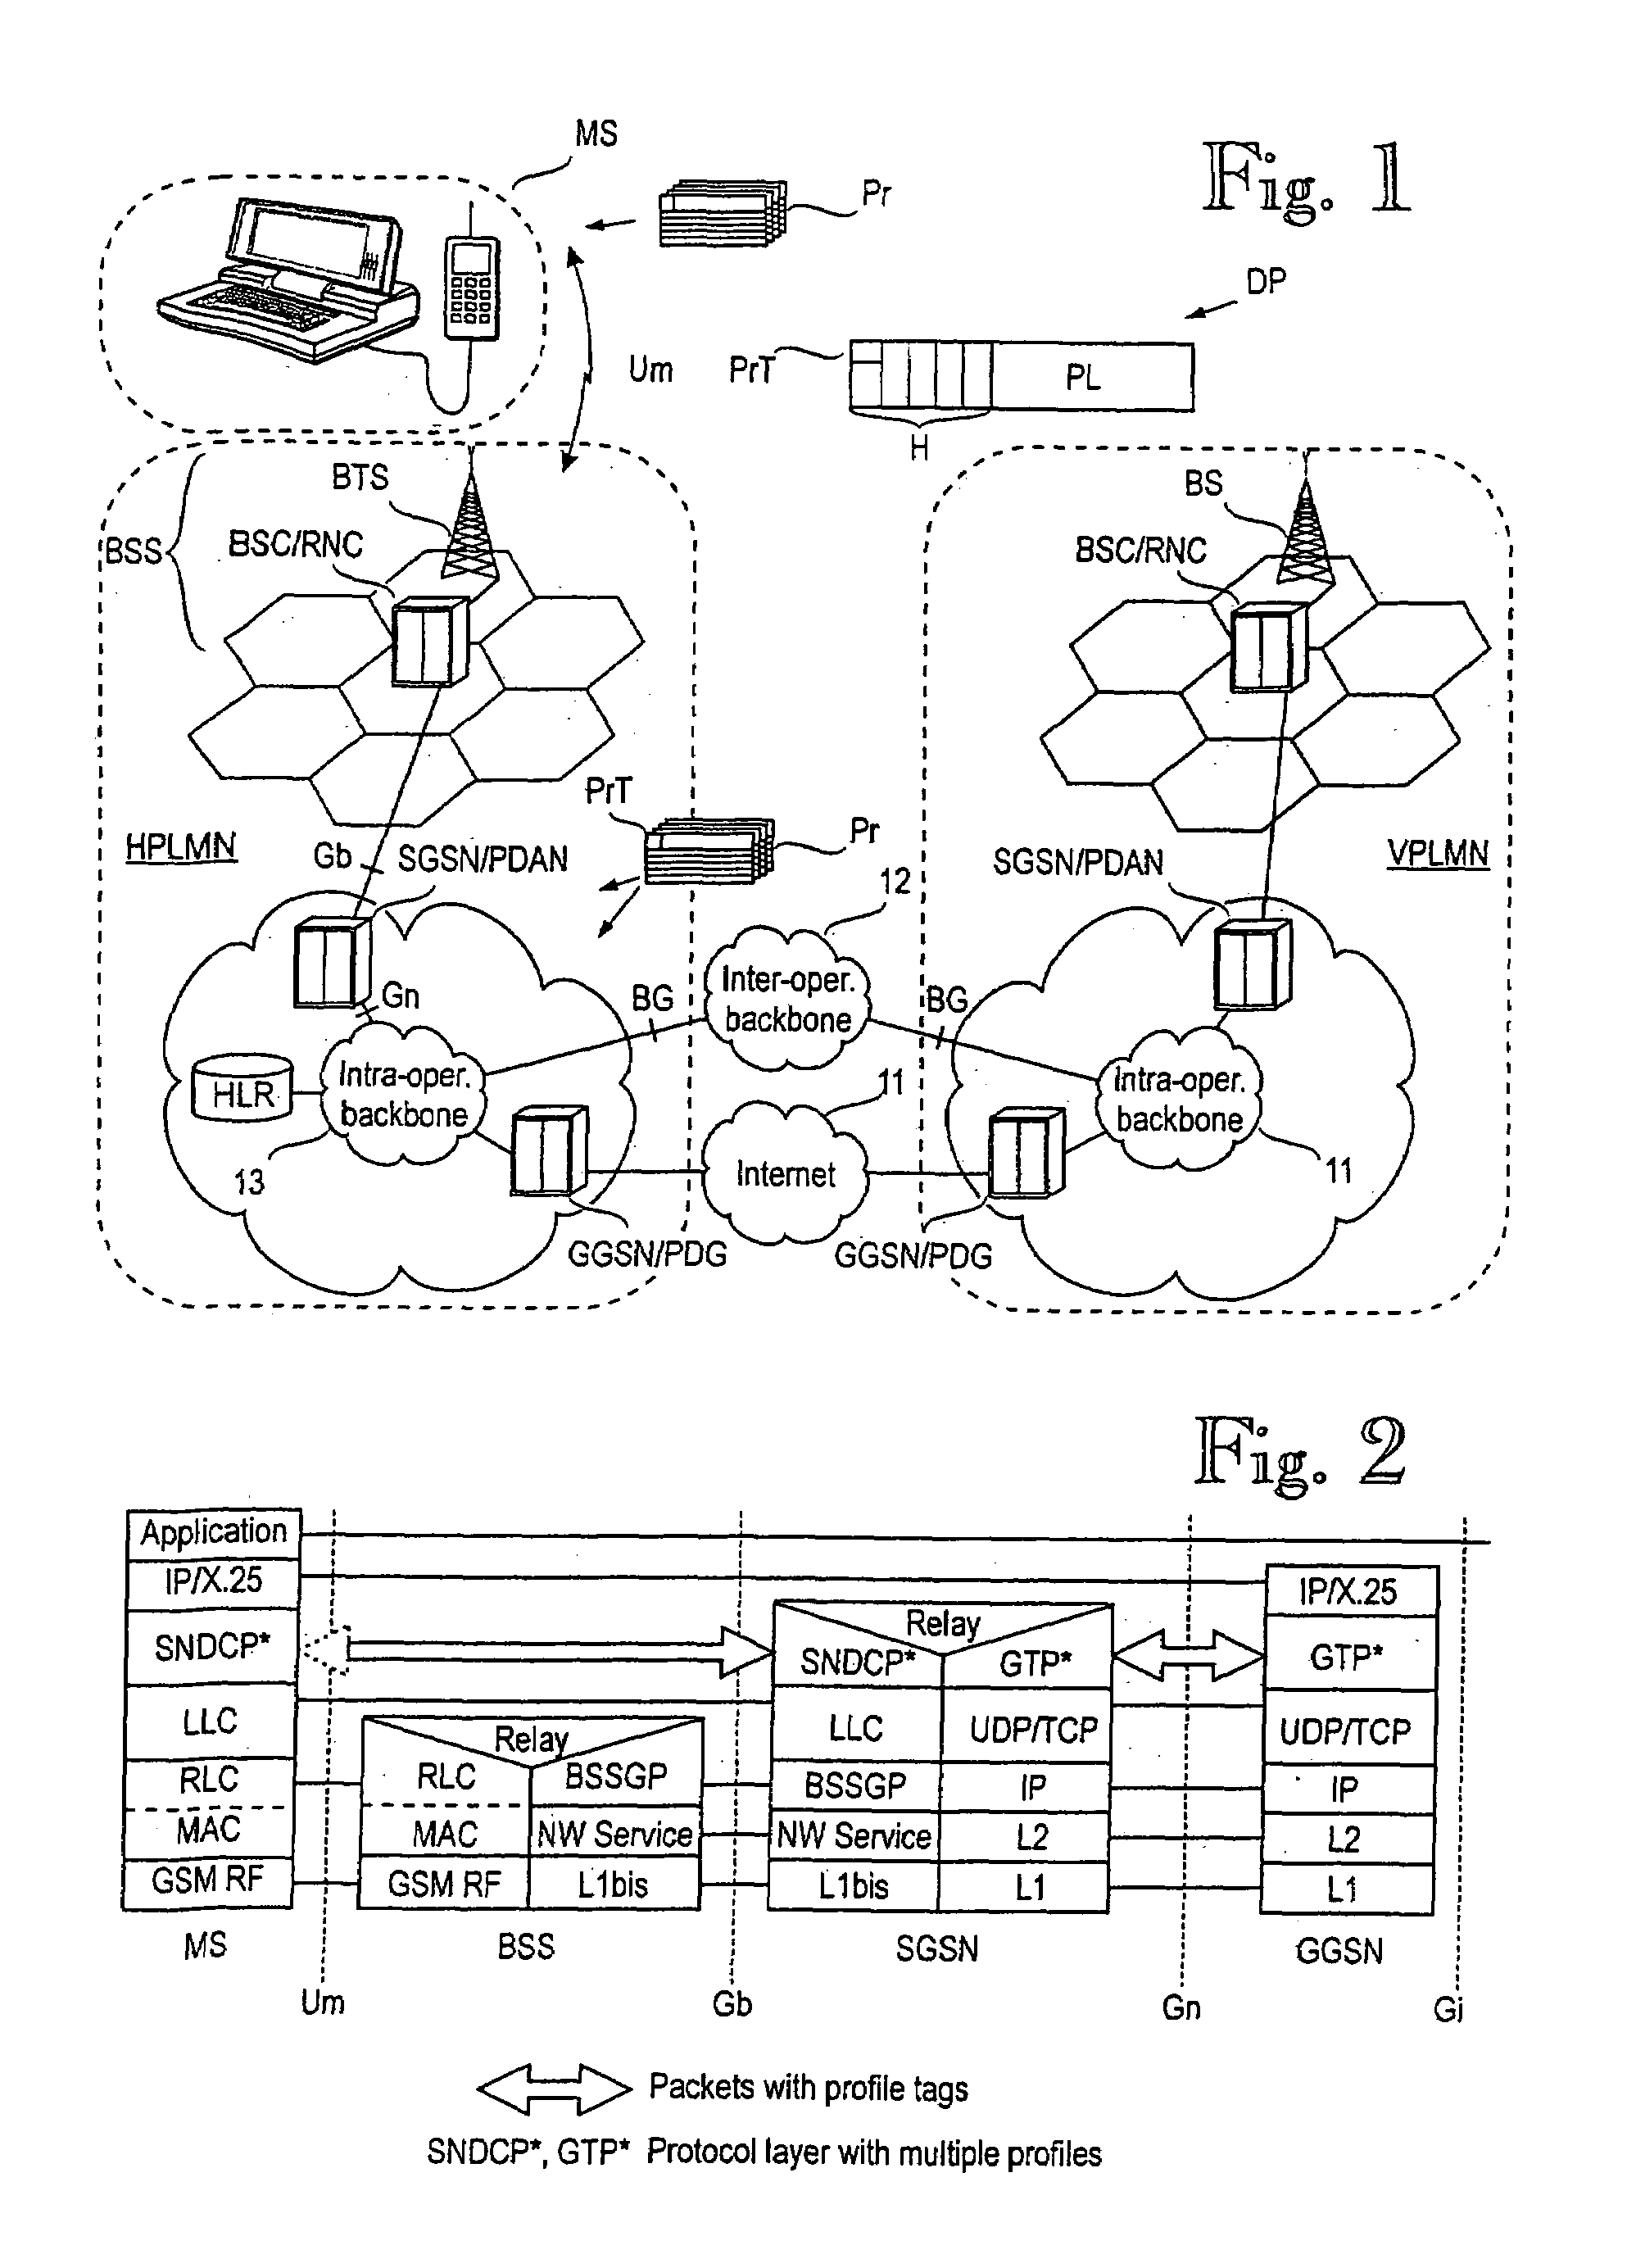 Controlling quality of service in a mobile communications system